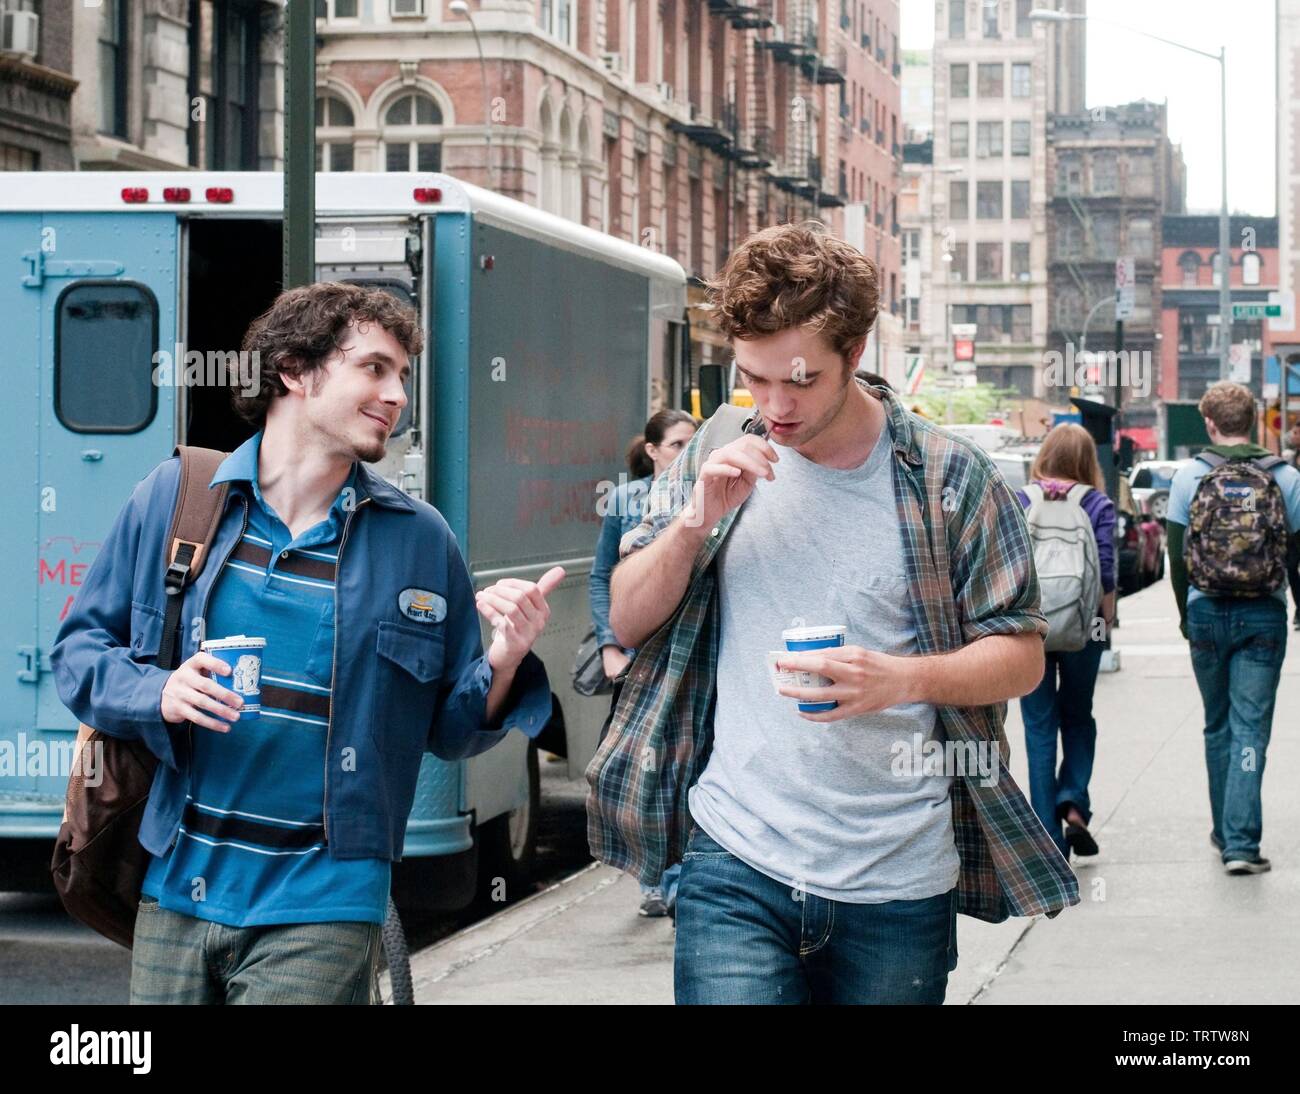 Robert Pattinson And Tate Ellington In Remember Me 10 Copyright Editorial Use Only No Merchandising Or Book Covers This Is A Publicly Distributed Handout Access Rights Only No License Of Copyright Provided